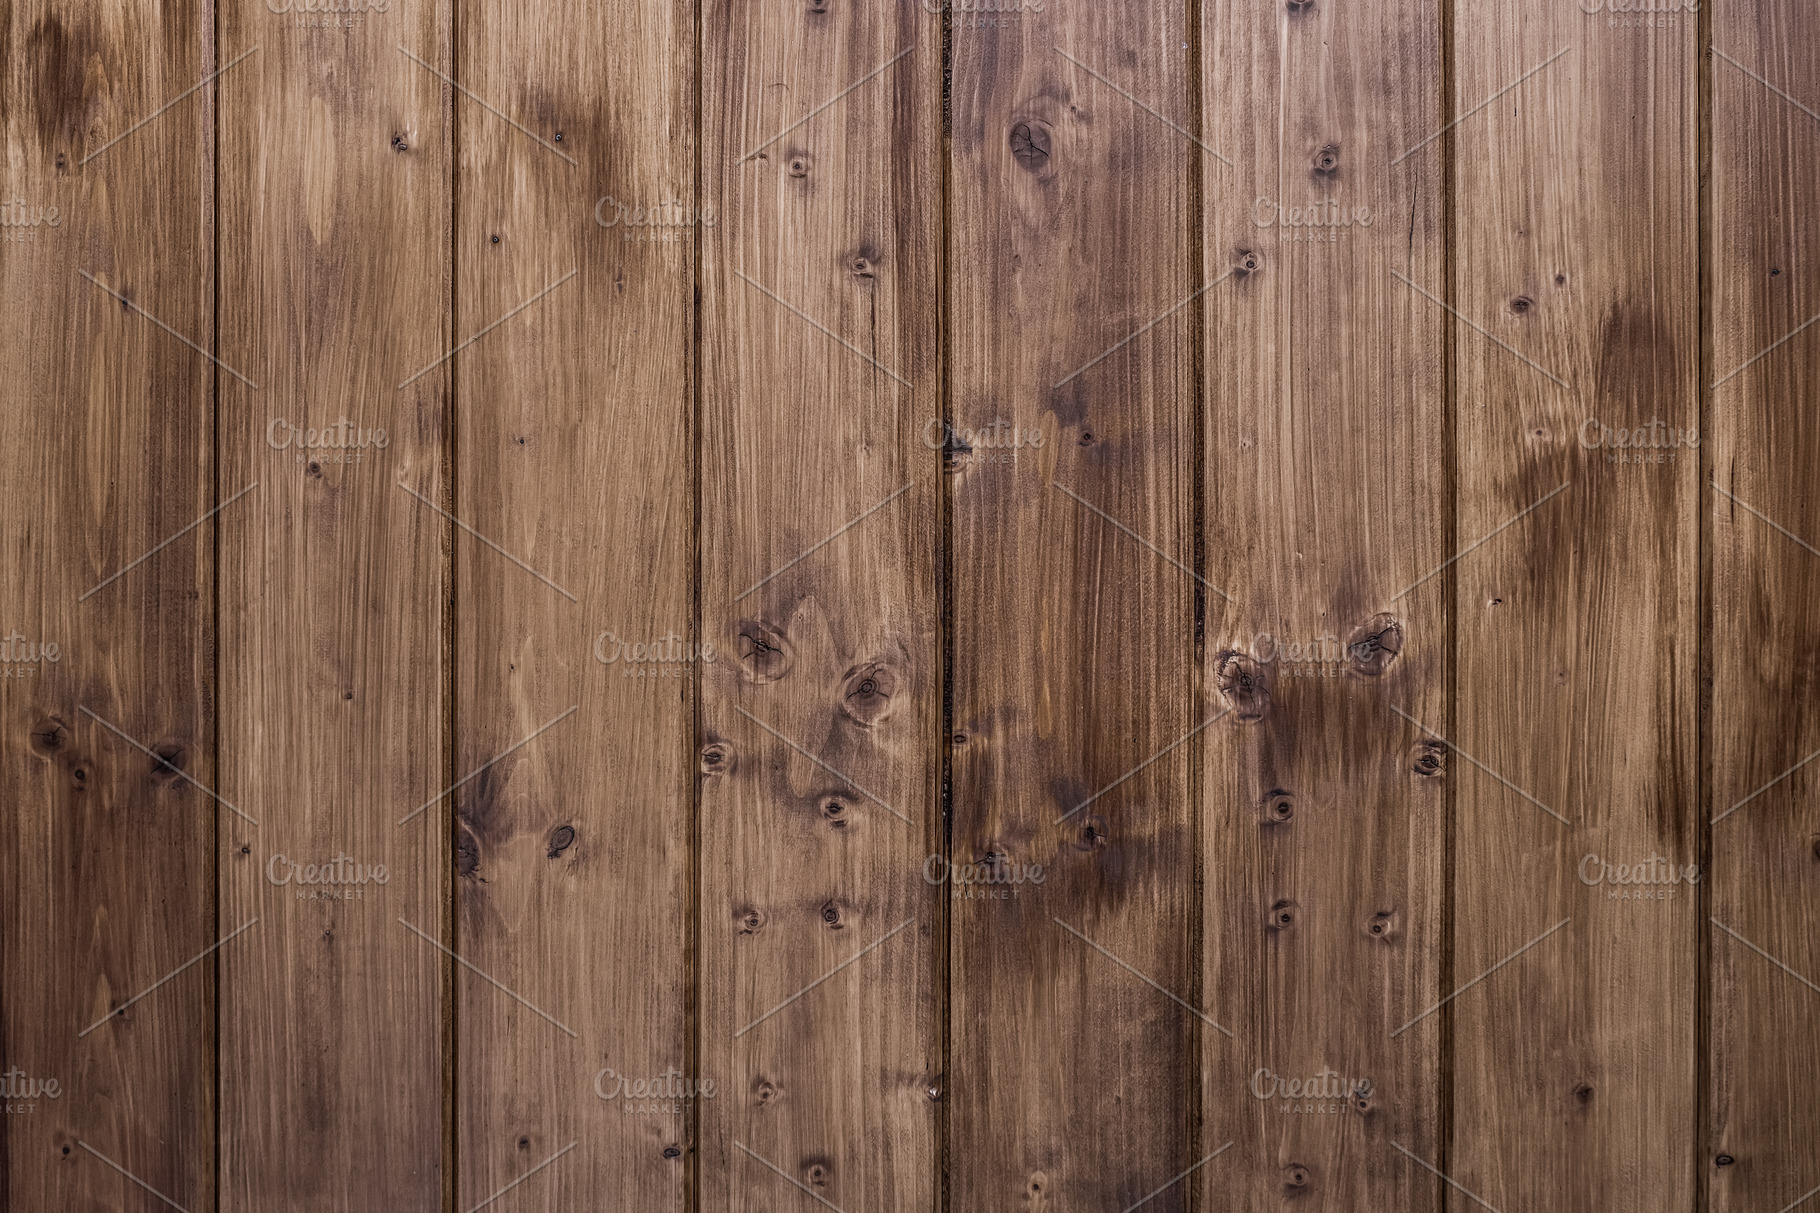 Rustic wood texture background ~ Abstract Photos ...